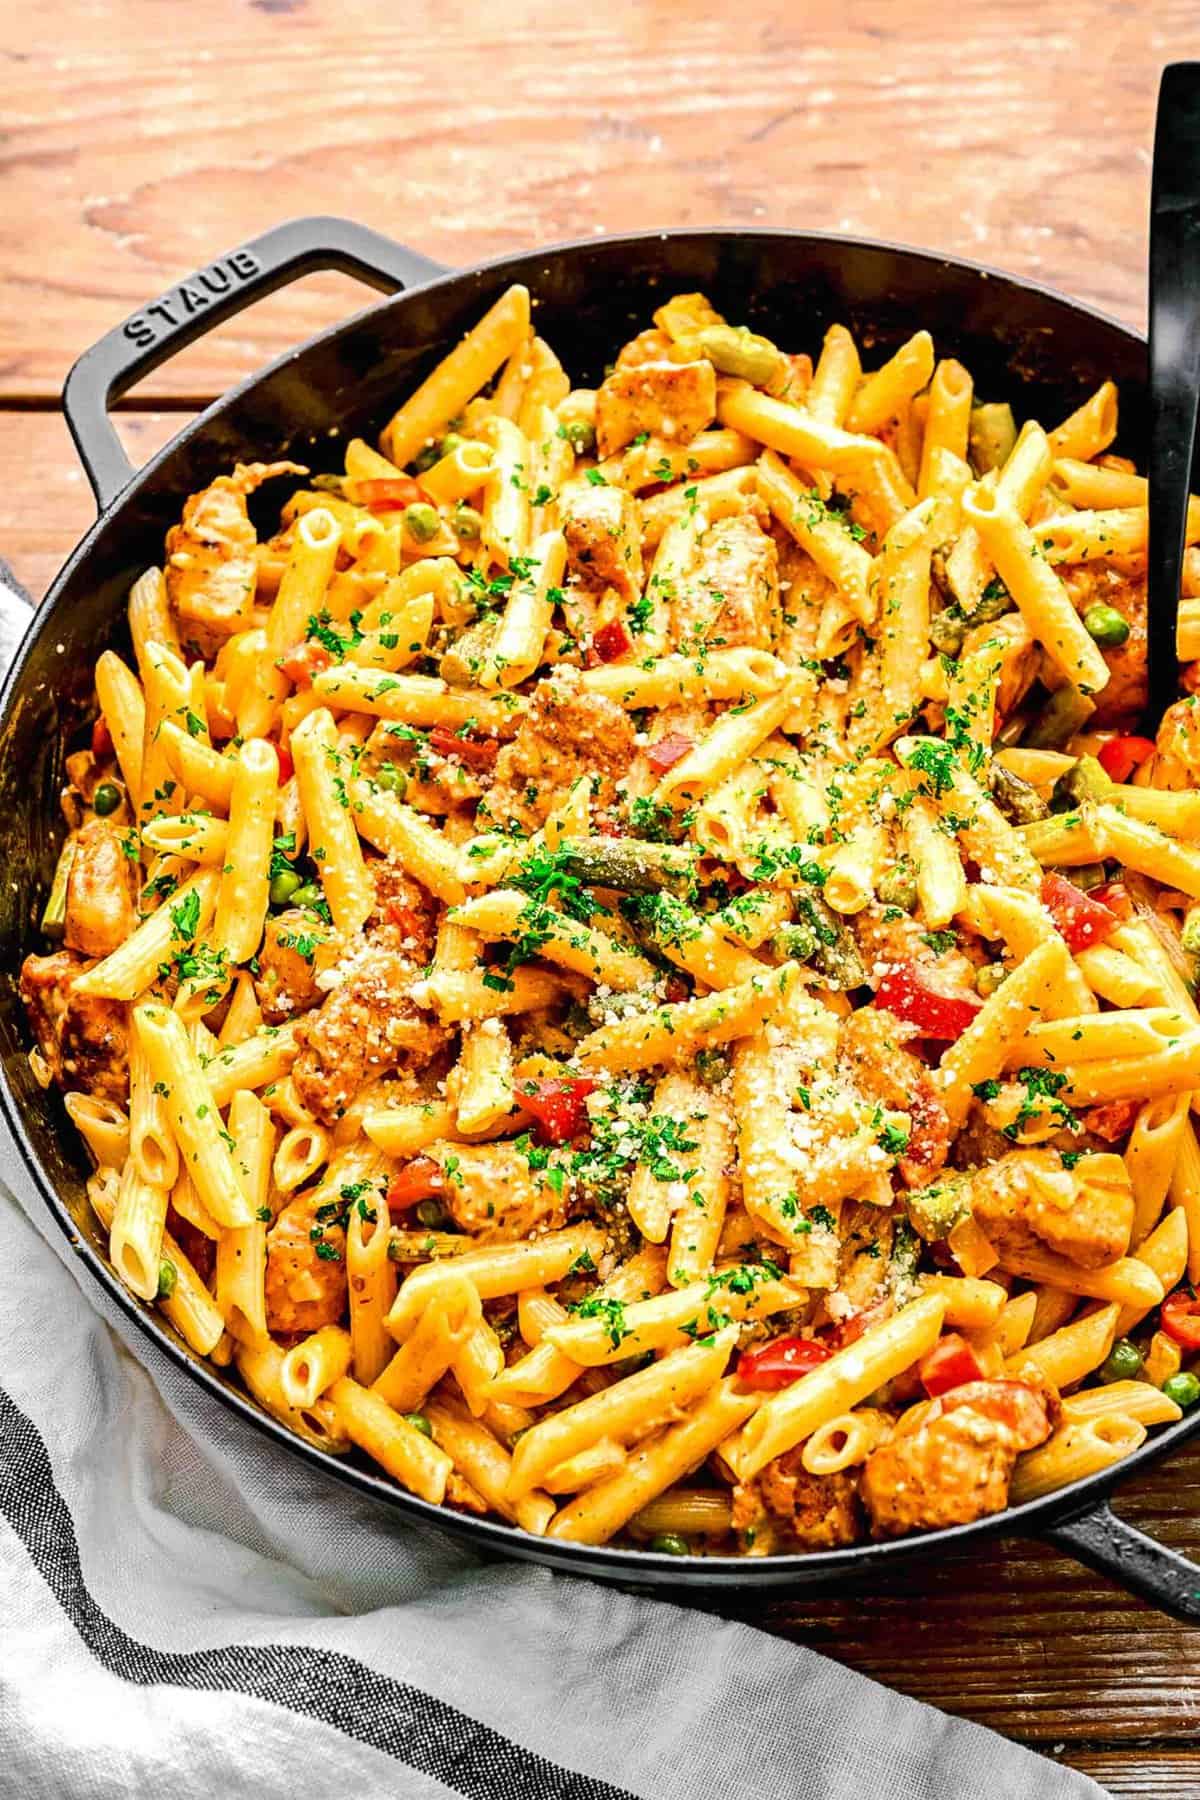 Spicy chicken chipotle pasta in a pan with a fork.